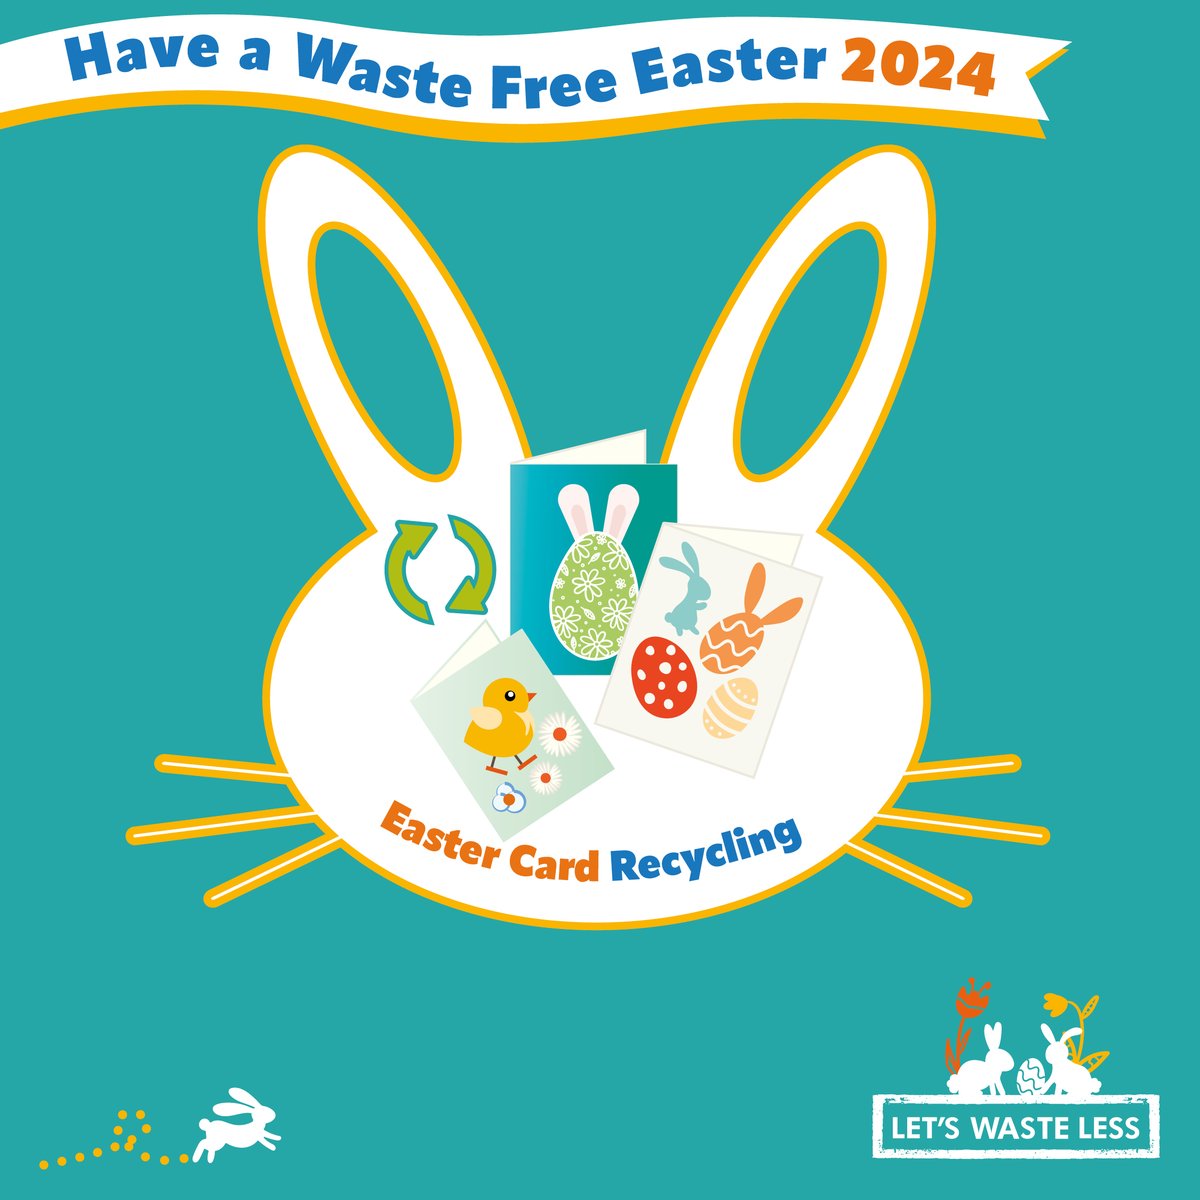 Don't forget to recycle your Easter cards! 🐰♻️ If they have glitter, cut it out for next year. Let's reduce waste together! #letswasteless #wastefreeeaster #recycle #reducewaste 🌼